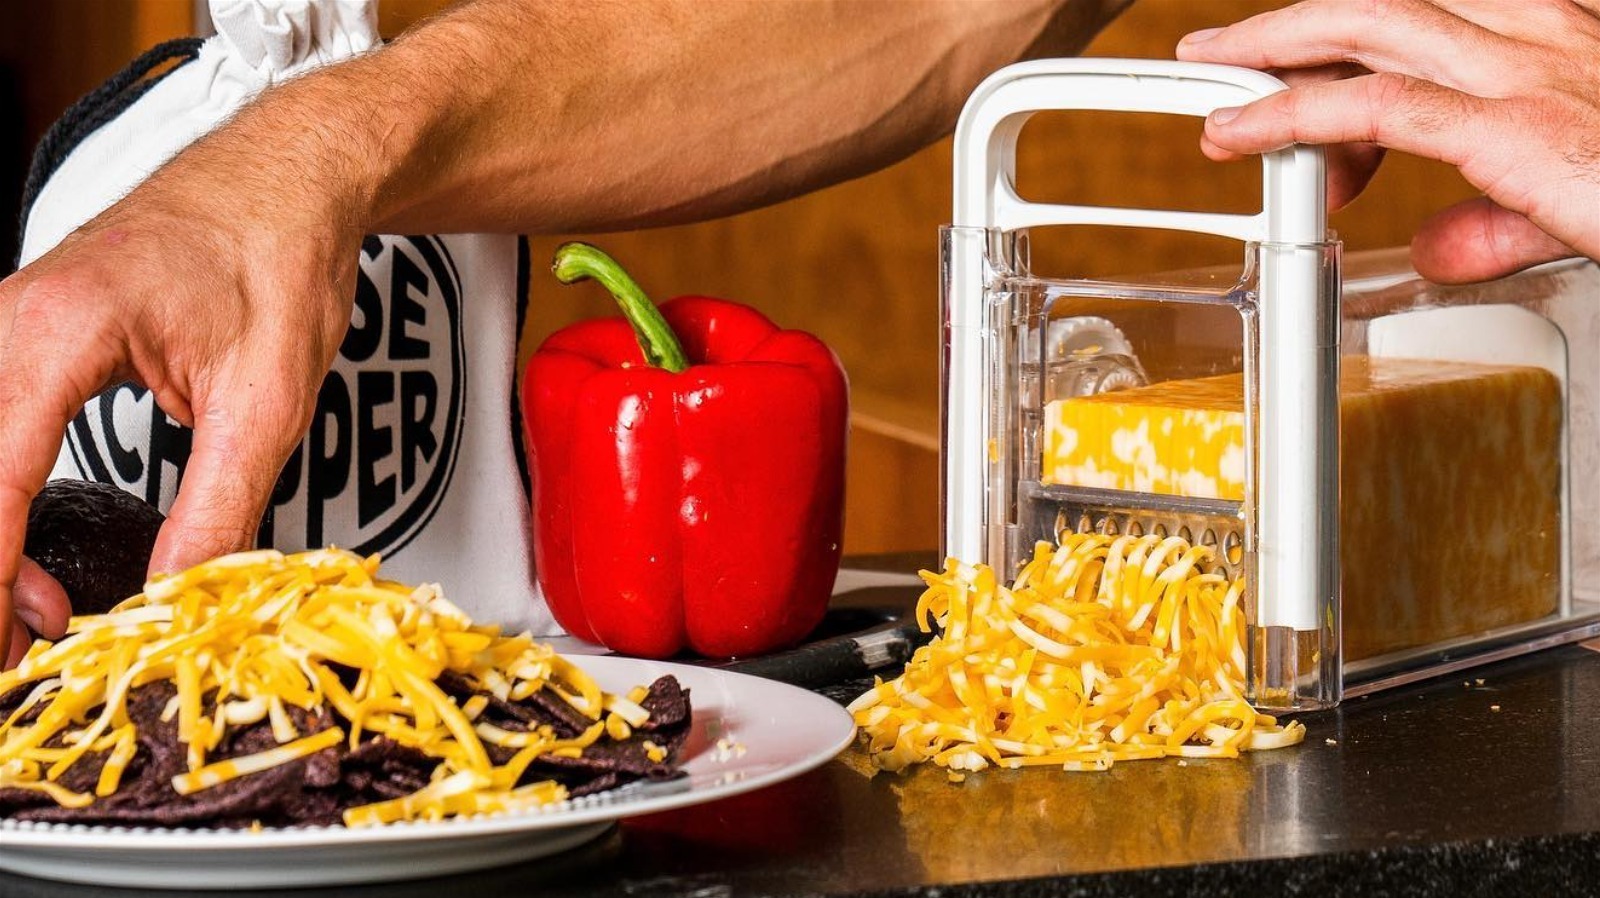 THE CHEESE CHOPPER: World's Best All-In-One Cheese Device by Tate